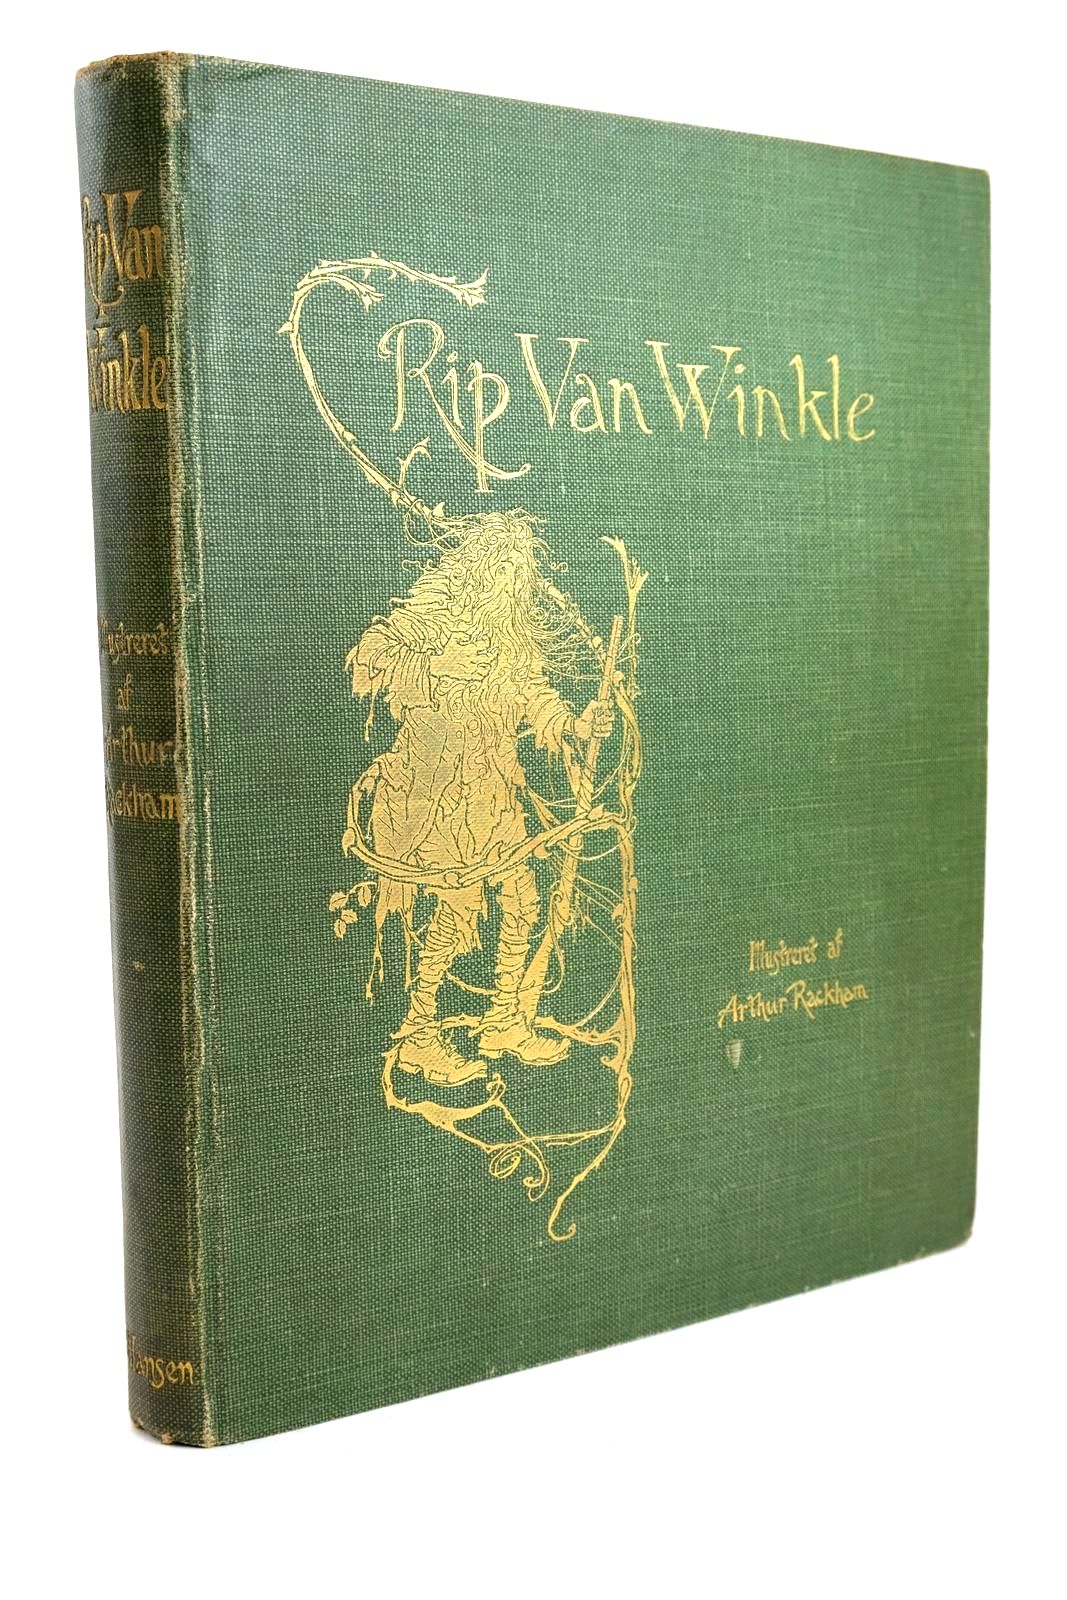 Photo of RIP VAN WINKLE written by Irving, Washington illustrated by Rackham, Arthur published by Peter Hansens Forlag (STOCK CODE: 1320489)  for sale by Stella & Rose's Books